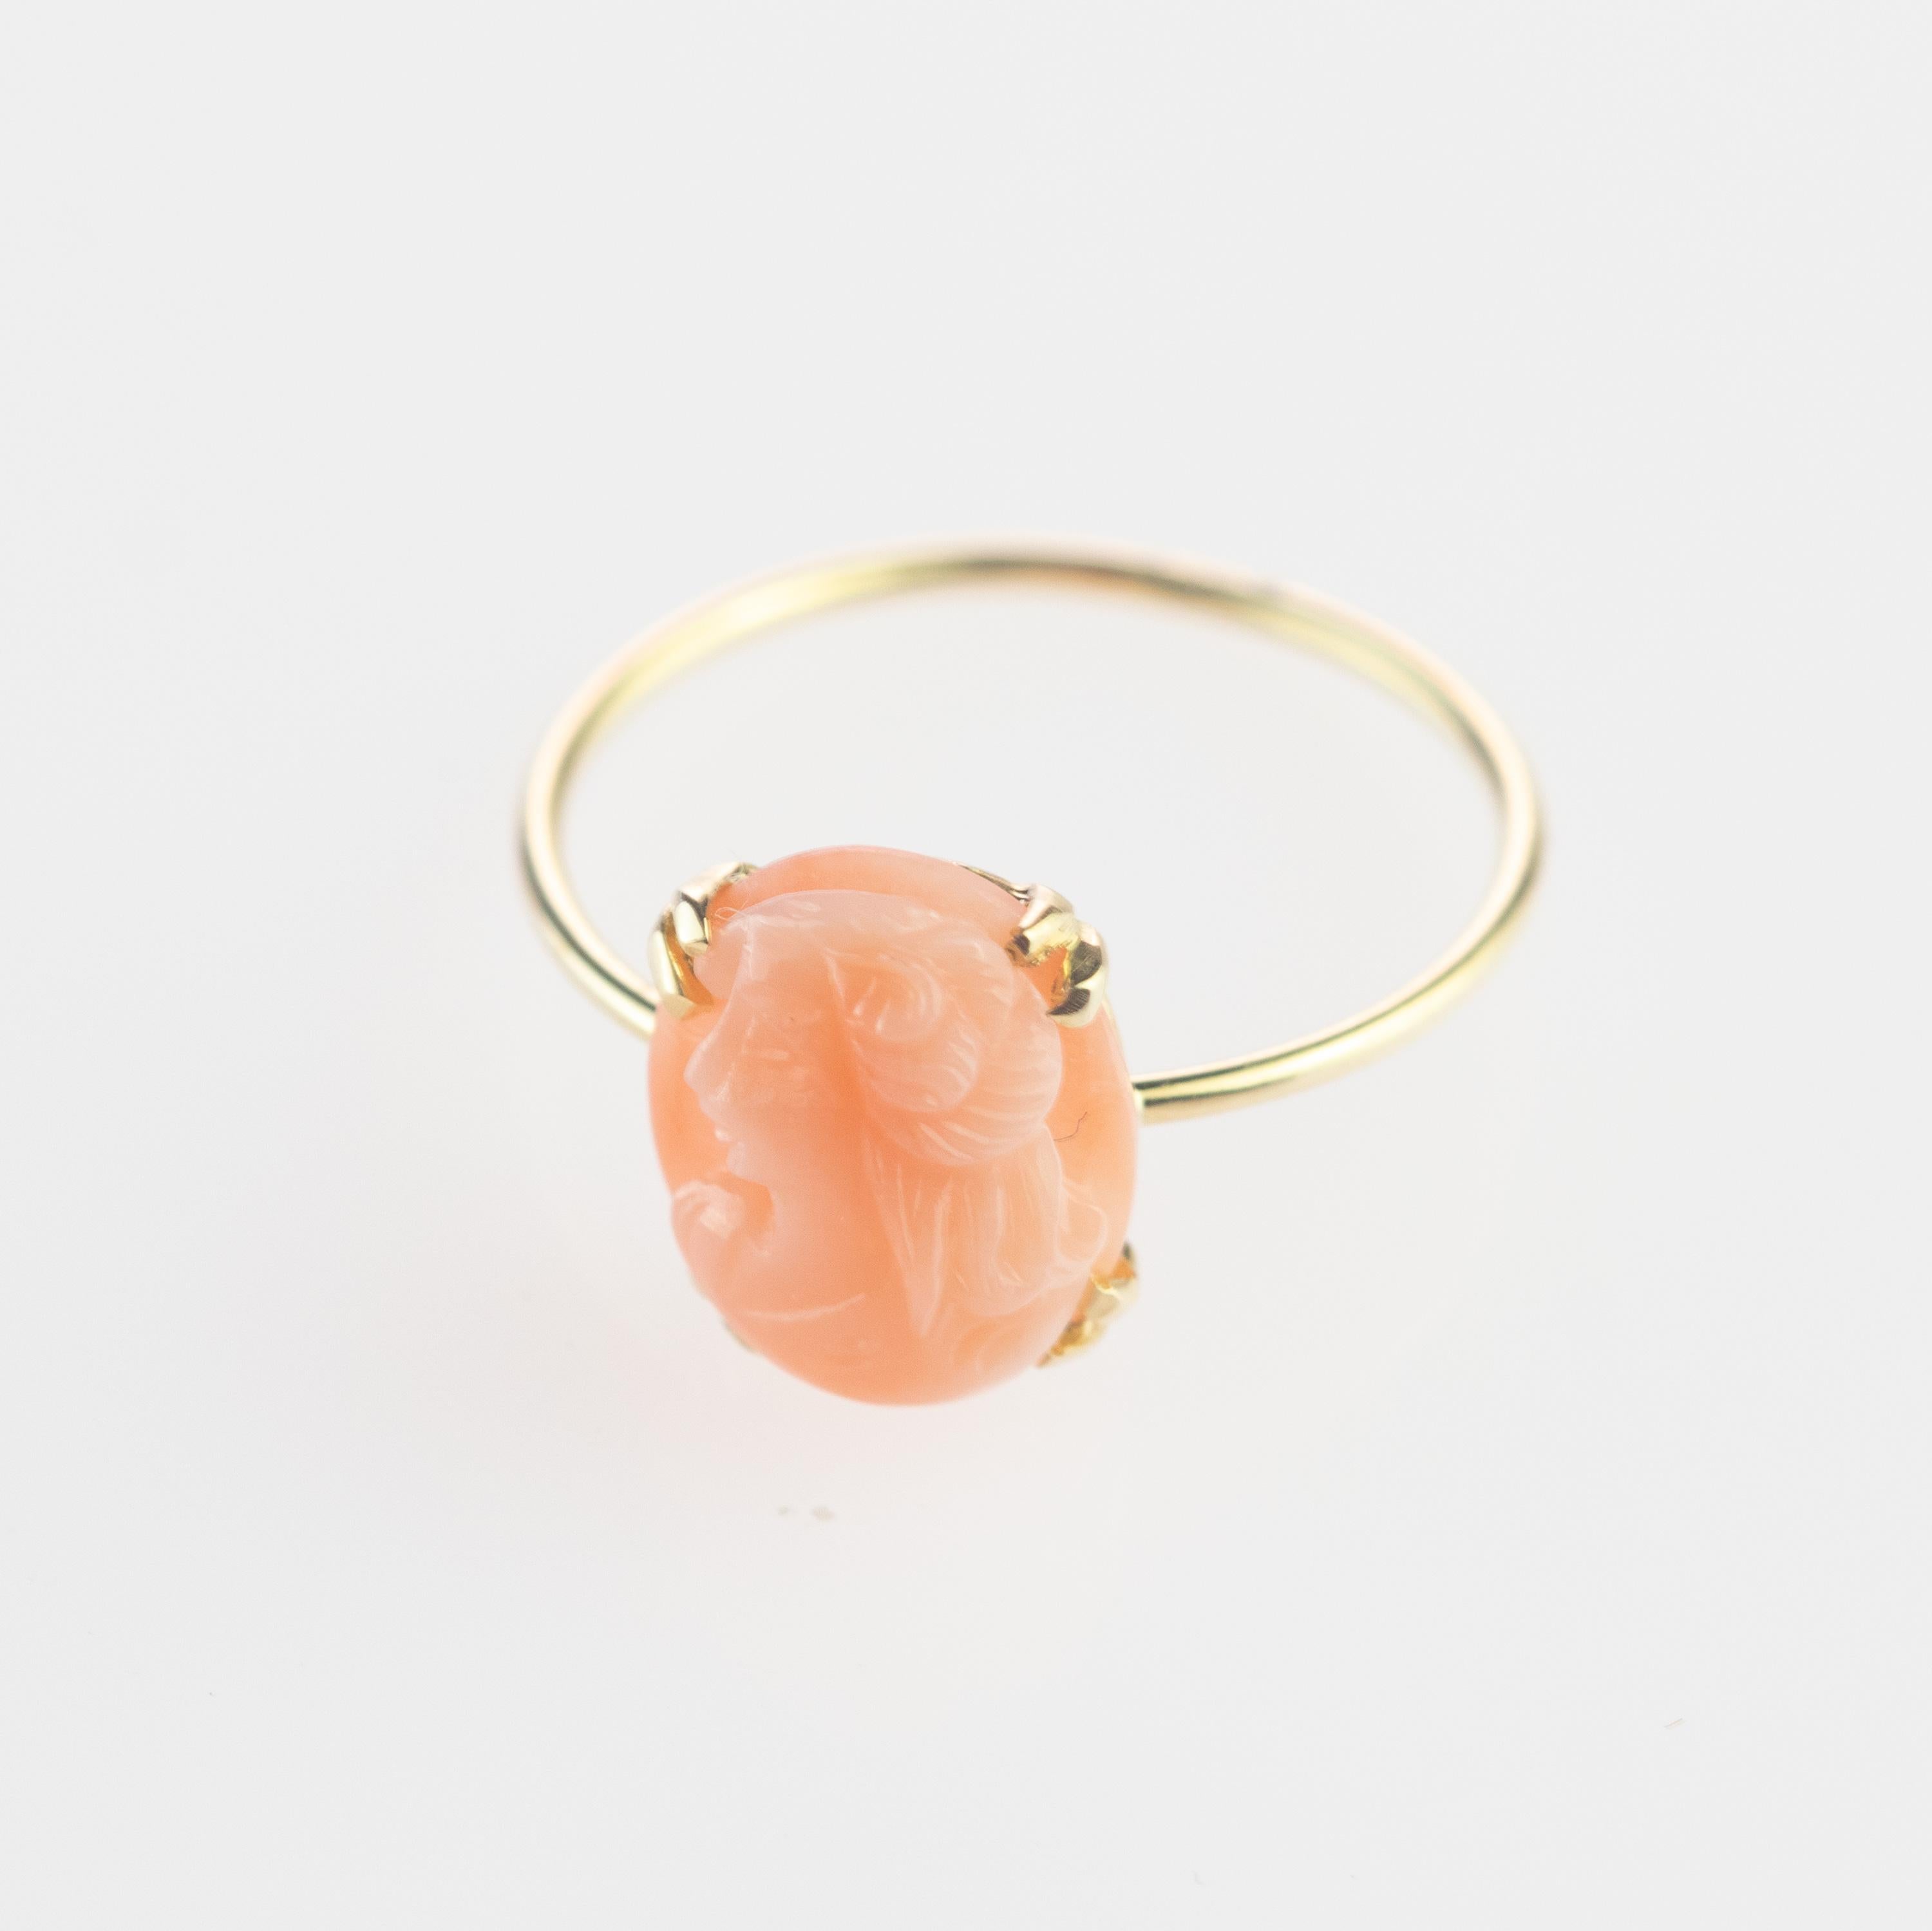 Women's Intini Jewels 2.5 Carat Pink Cameo Coral 9 Karat Gold Oval Handmade Chic Ring For Sale